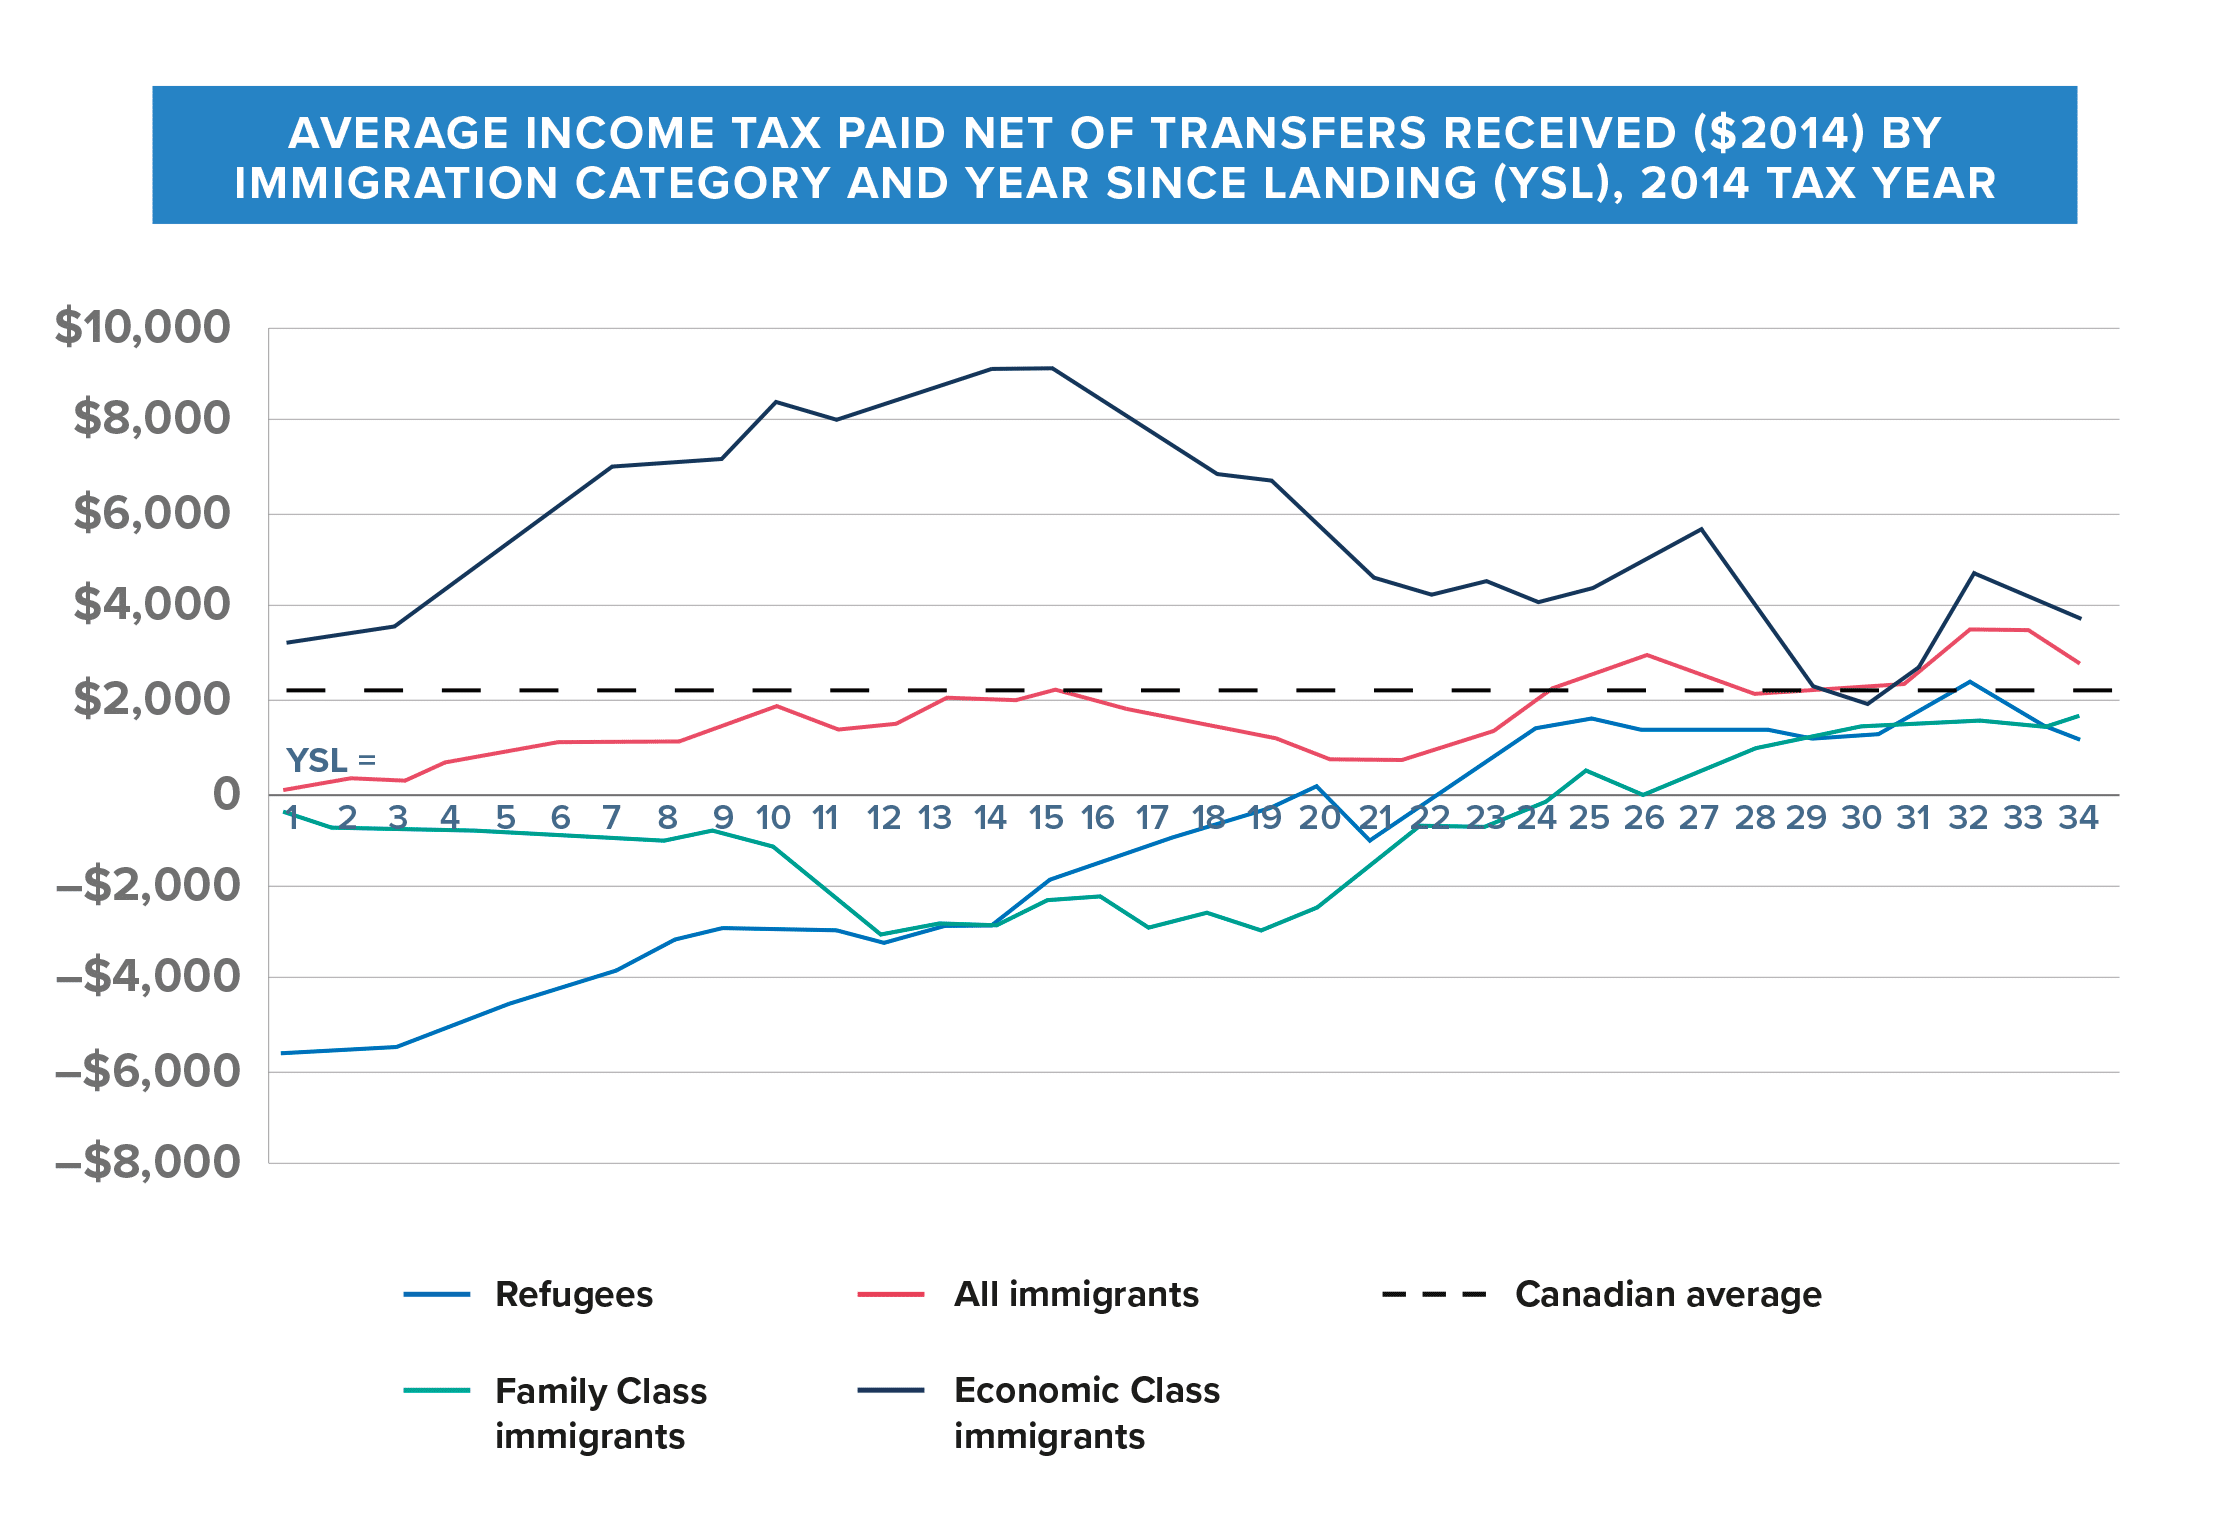 Graph showing income tax paid net of transfers received by immigration category and year since landing for the 2014 tax year.